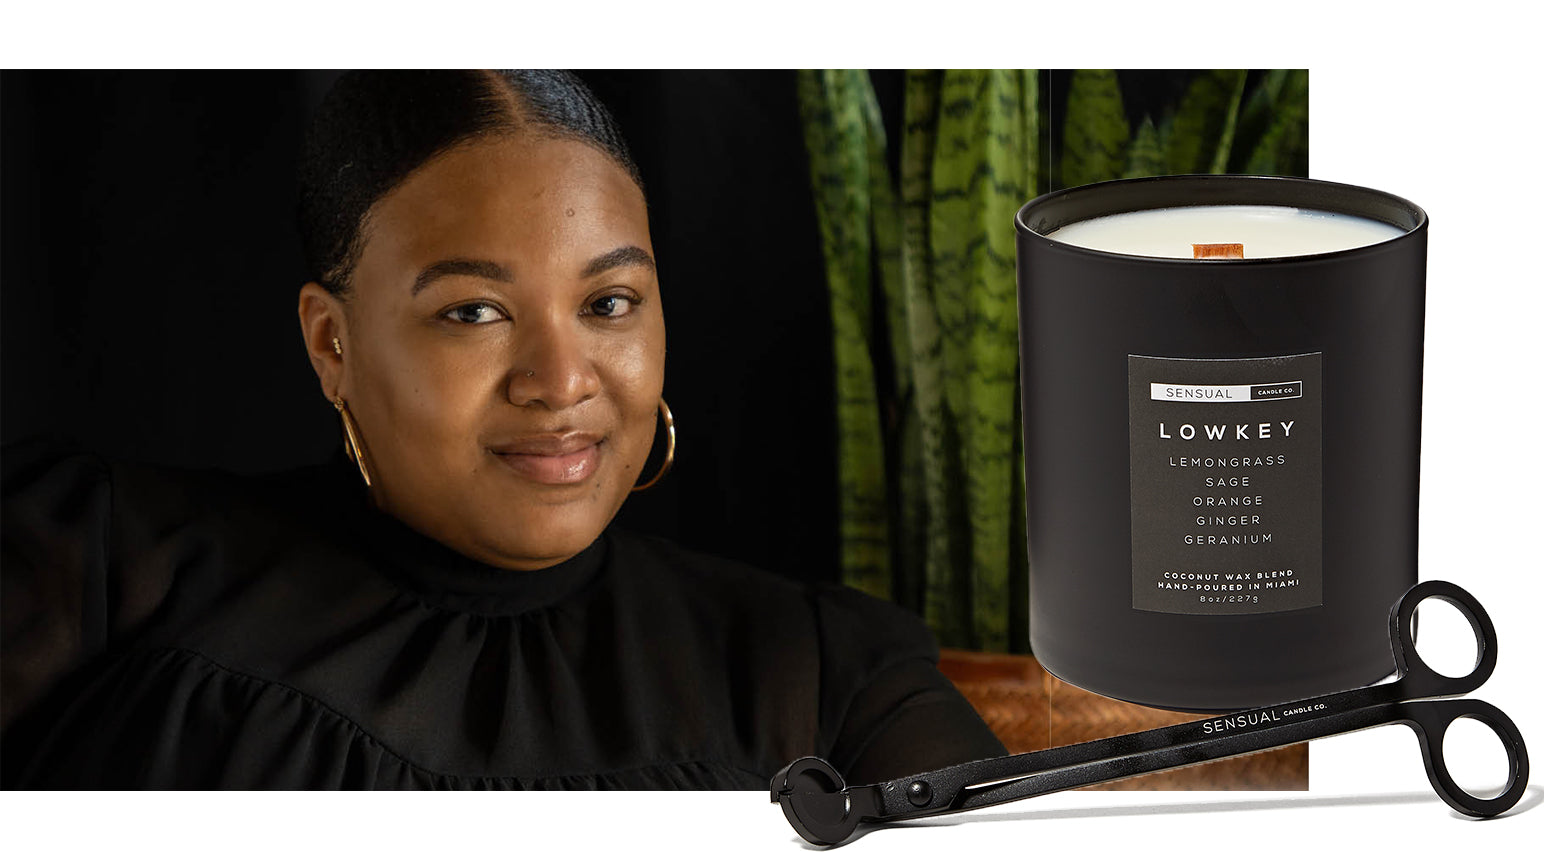 Sentrell Marsh Co-Founder/Creative Director of Sensual Candle Company